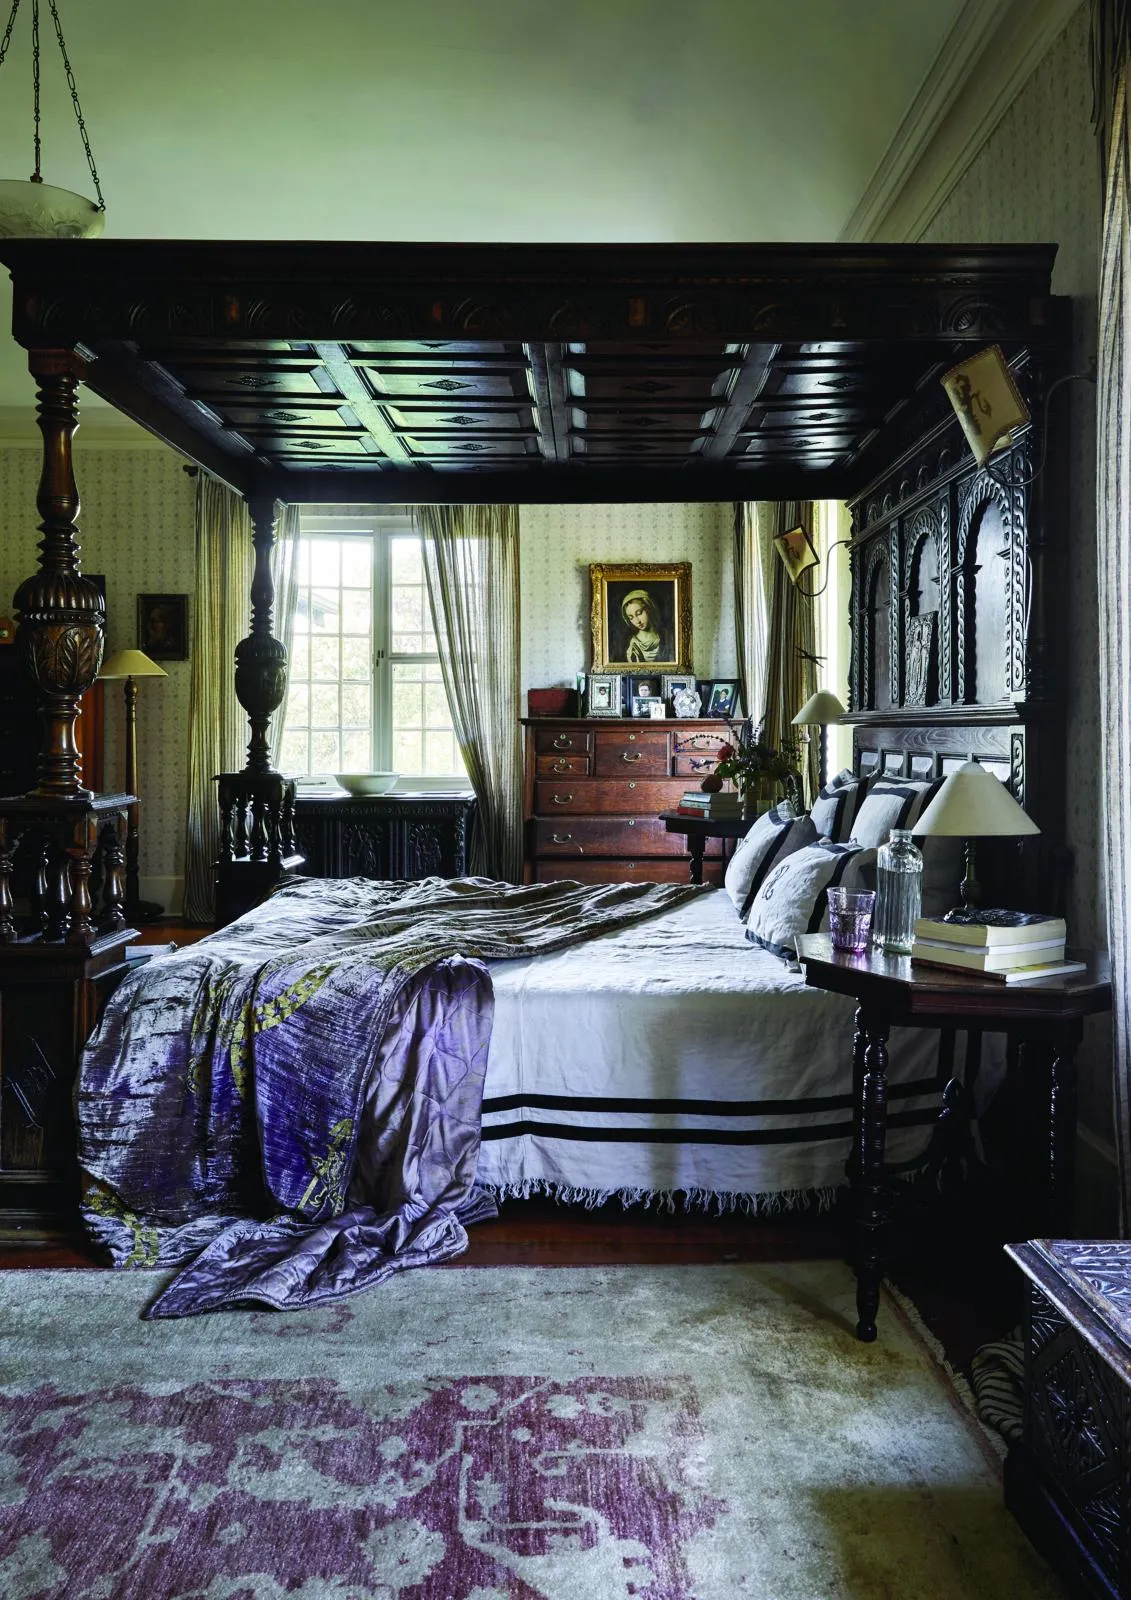 Johannesburg home carved 4-posted bed